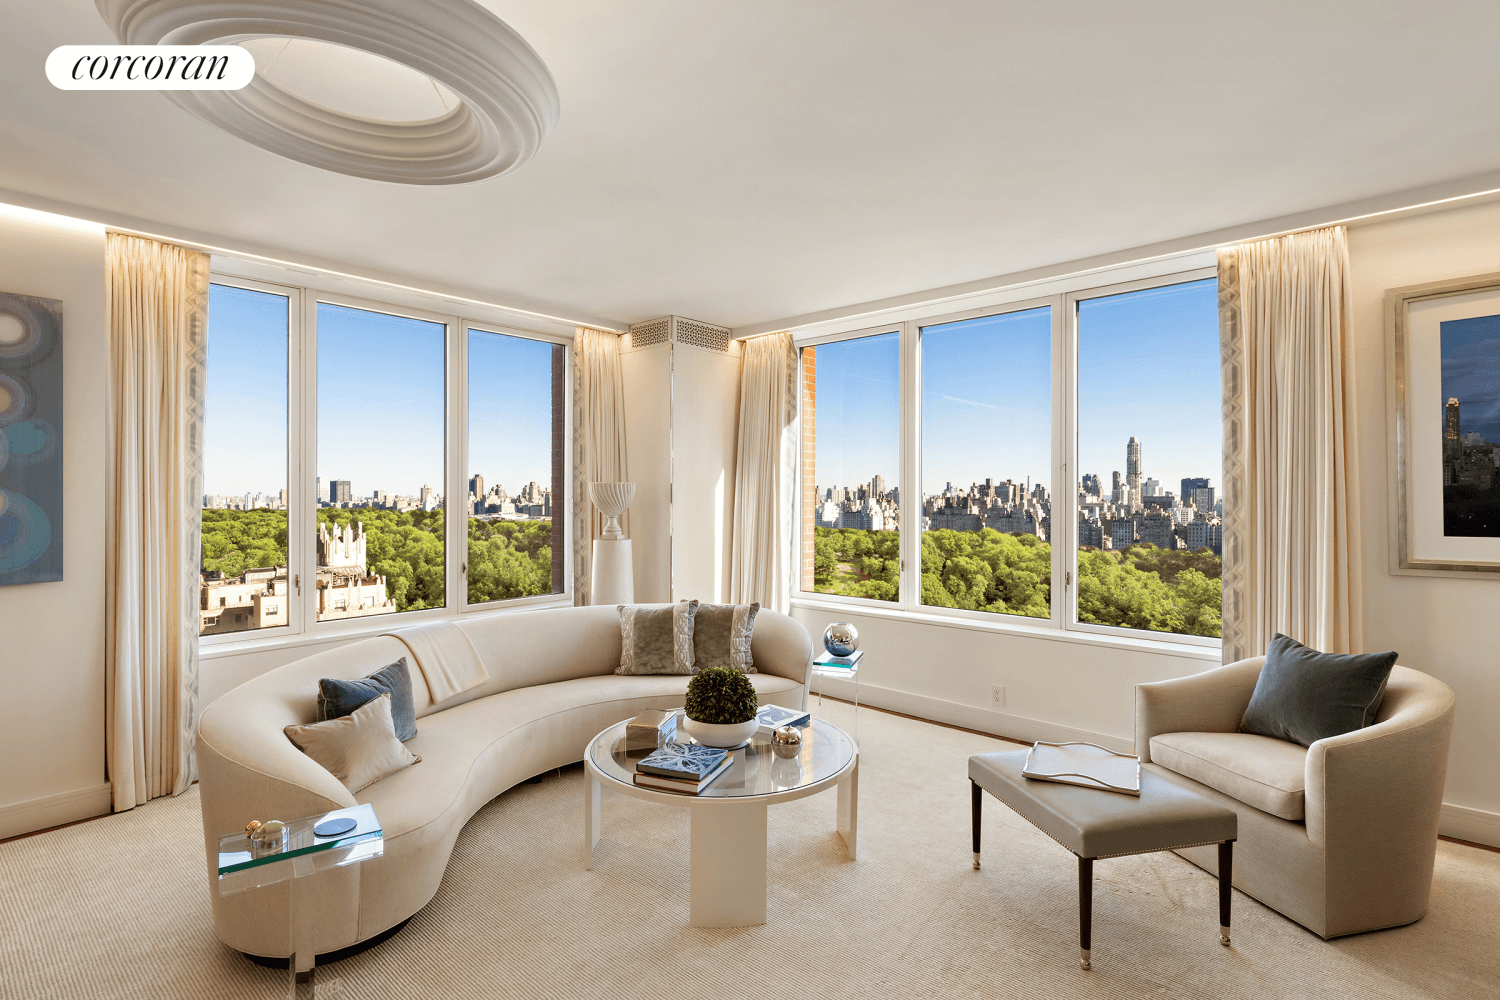 Floating high above Central Park in one of the Upper West Side's most sought after addresses, The Park Laurel, this meticulously renovated 3 bedroom 3.